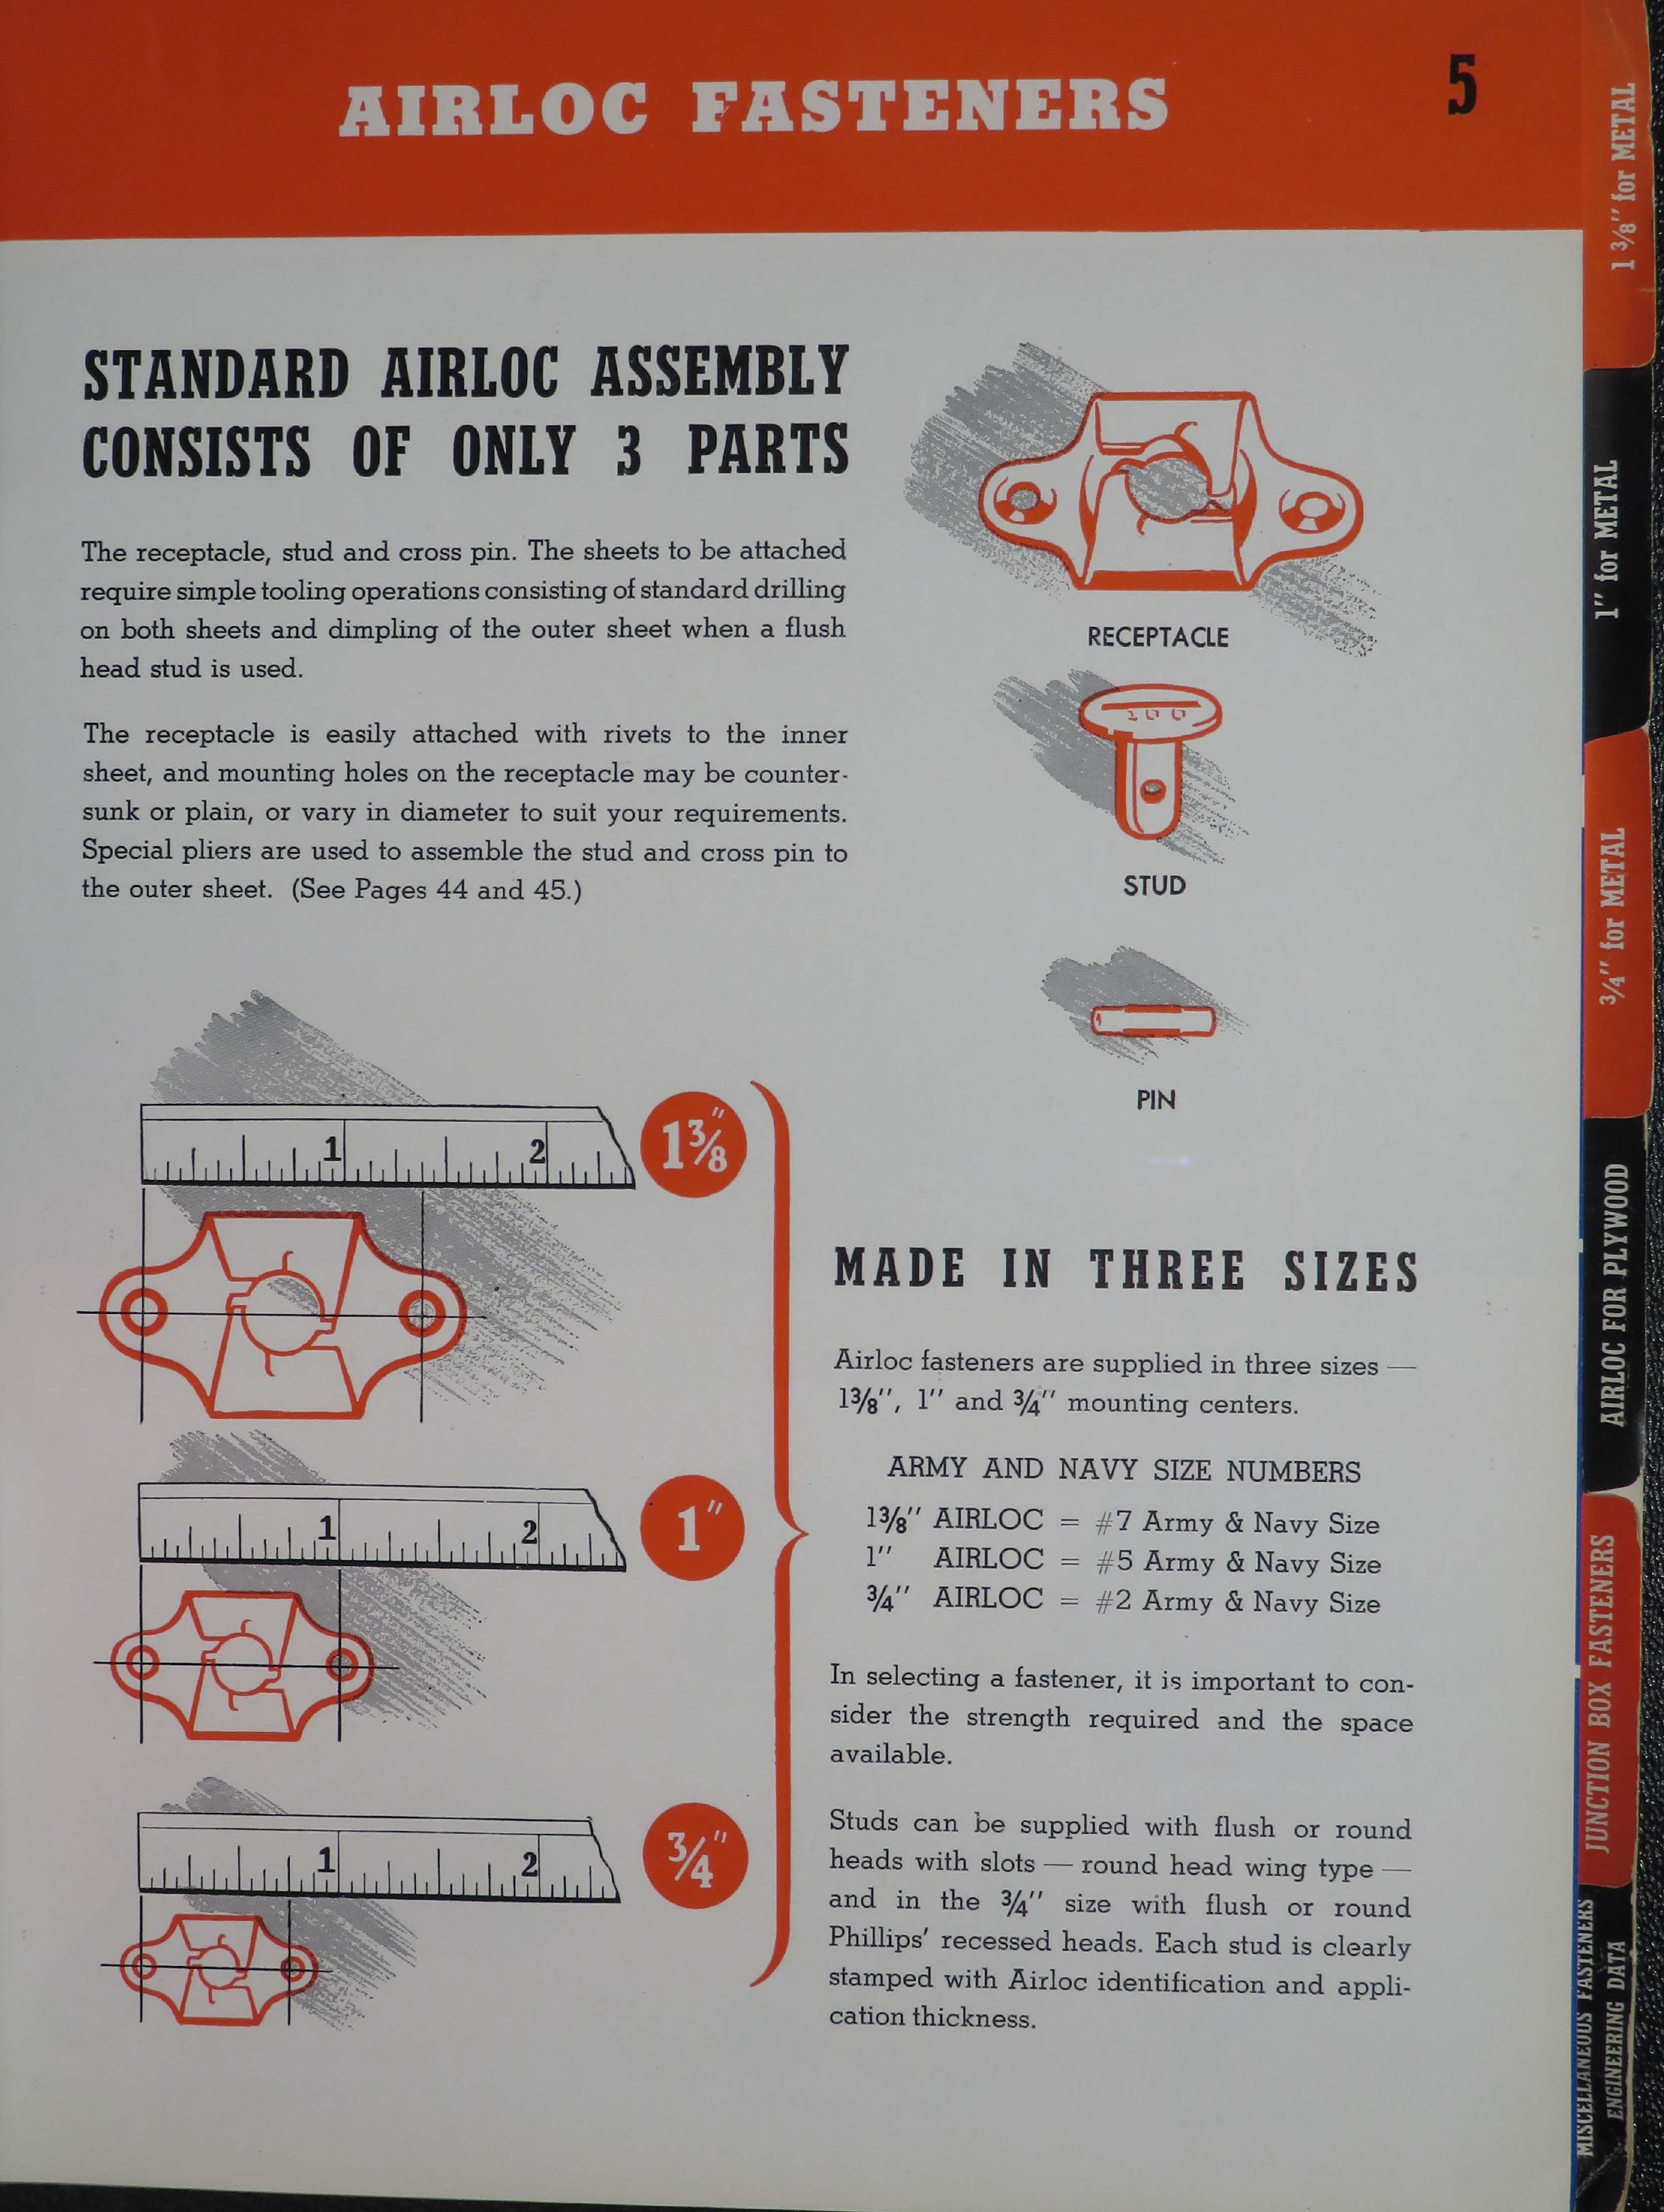 Sample page 7 from AirCorps Library document: Airlock Fasteners